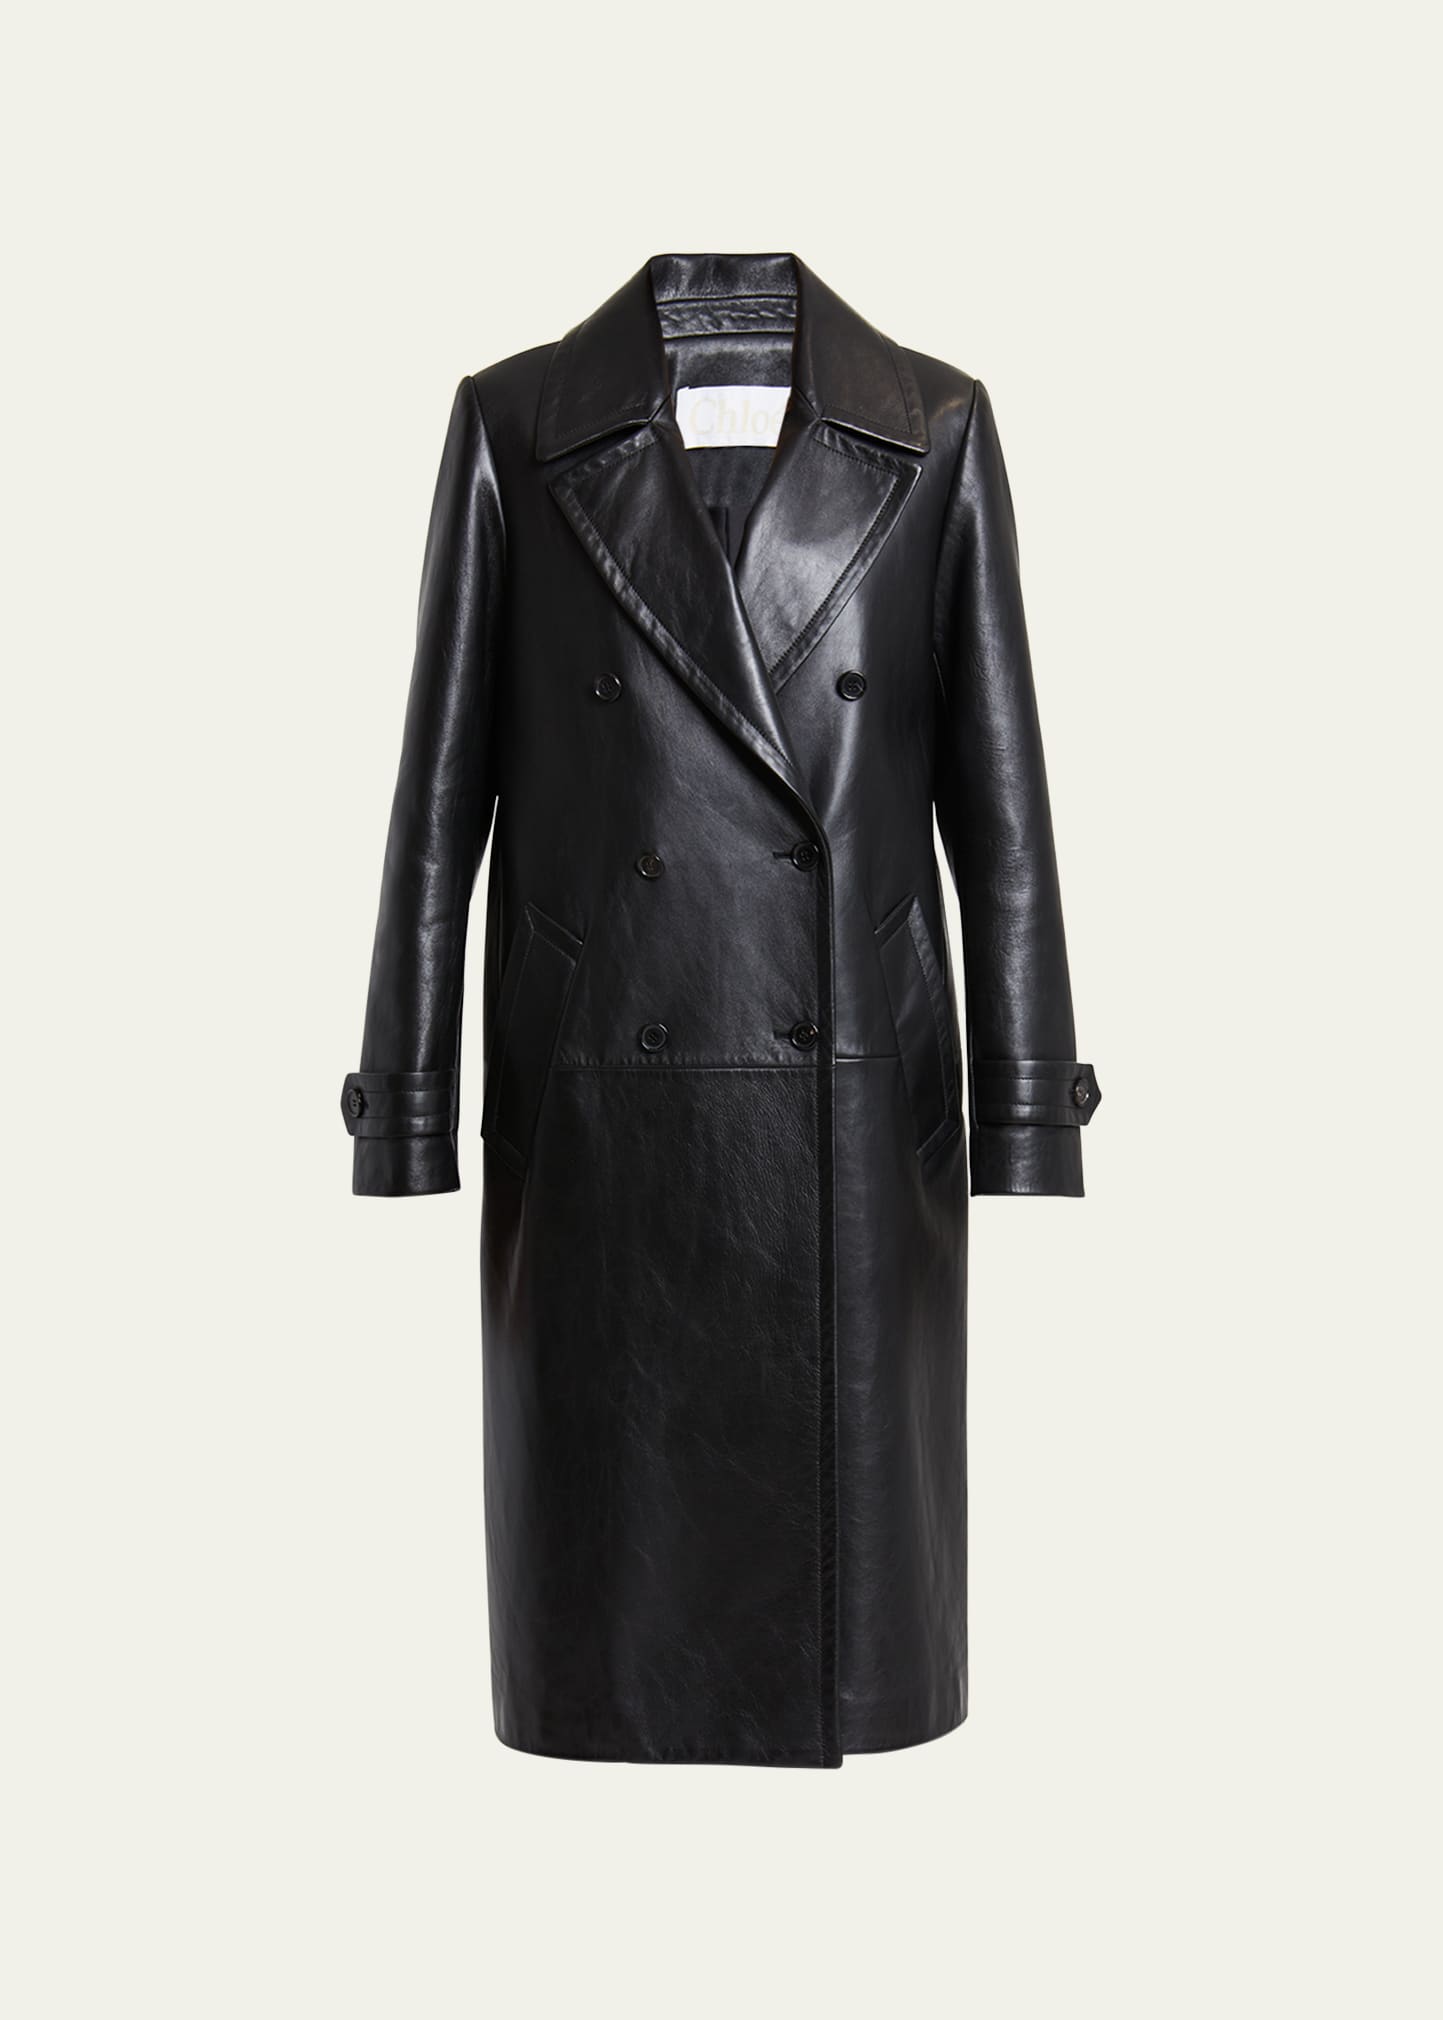 CHLOÉ DOUBLE-BREASTED SHINY LEATHER OVERCOAT